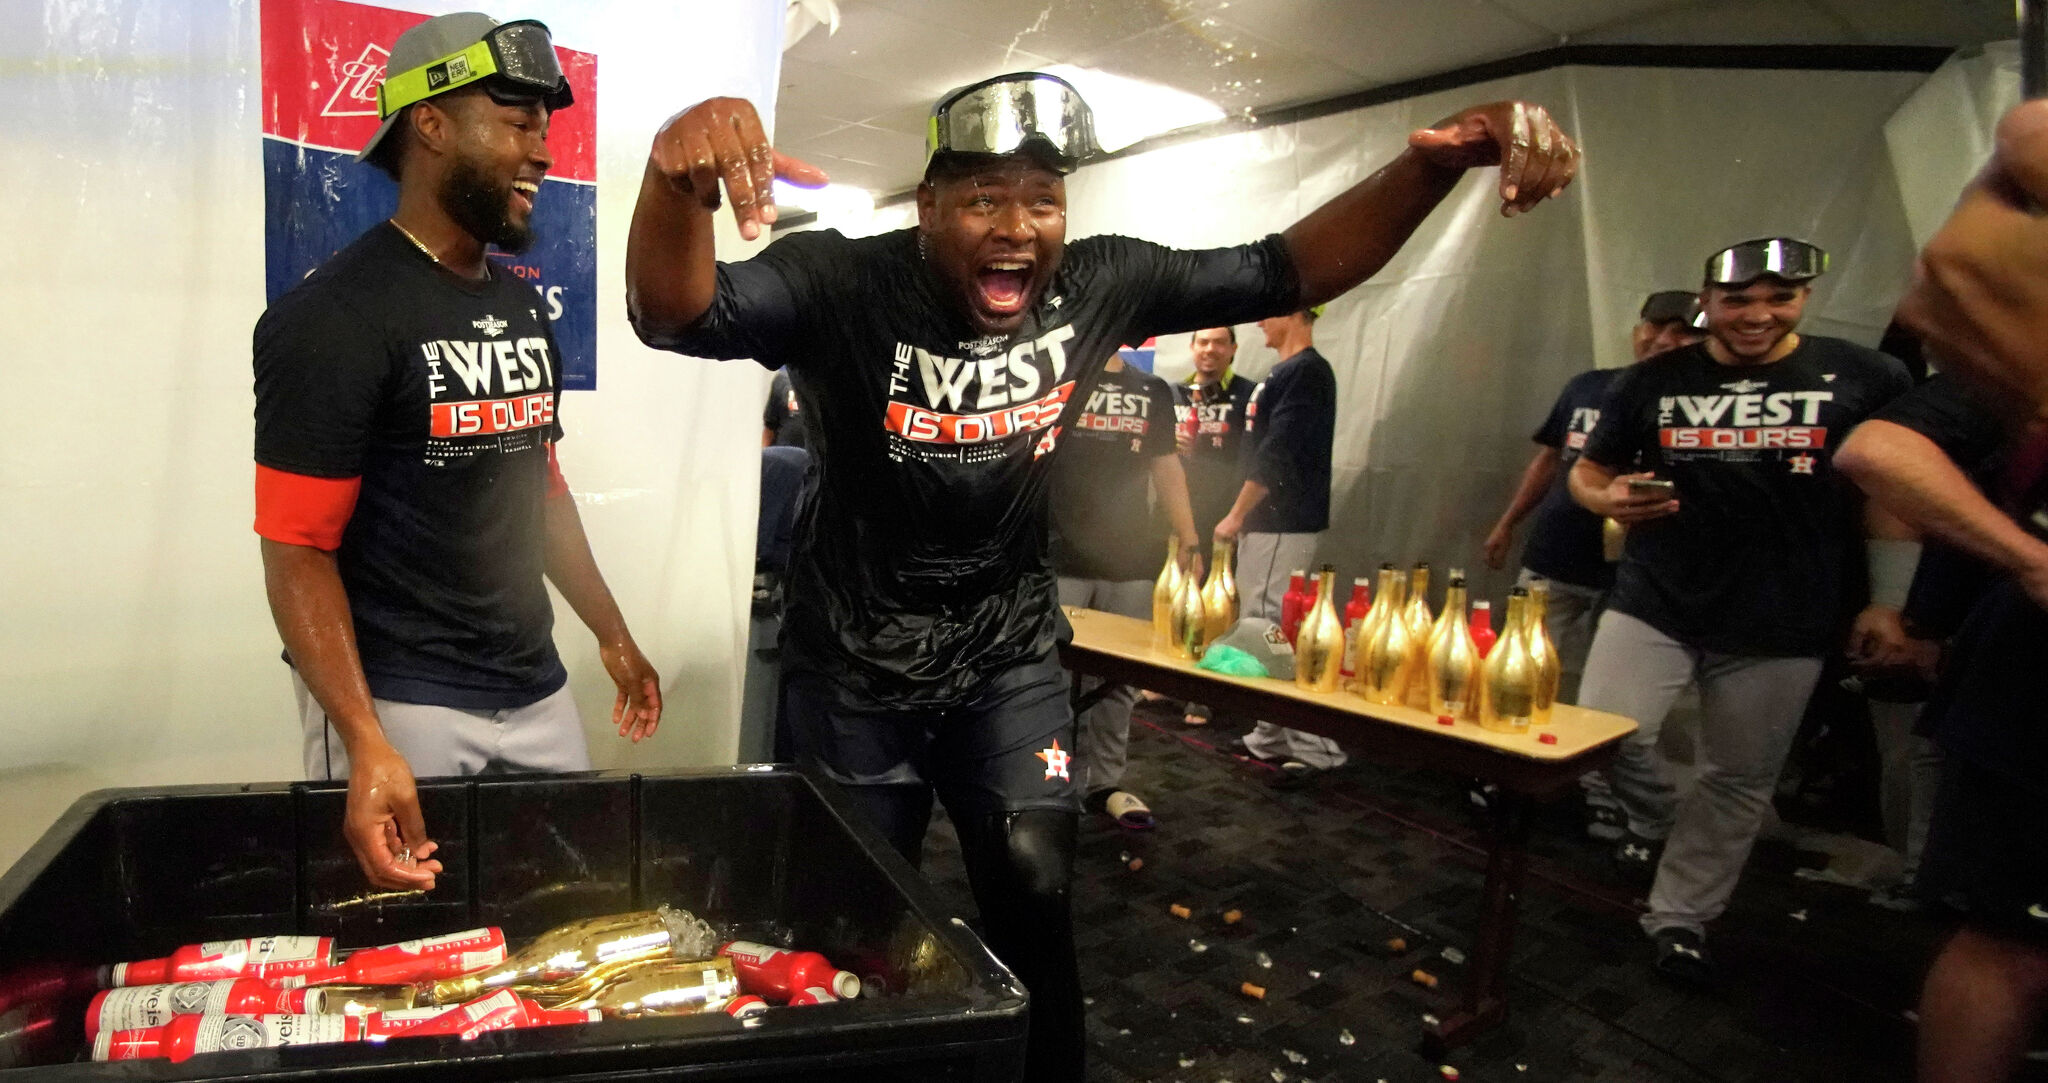 Houston Astros celebrate former All Star's return, teachers, and dog day  afternoon at fun-filled homestand - CultureMap Houston